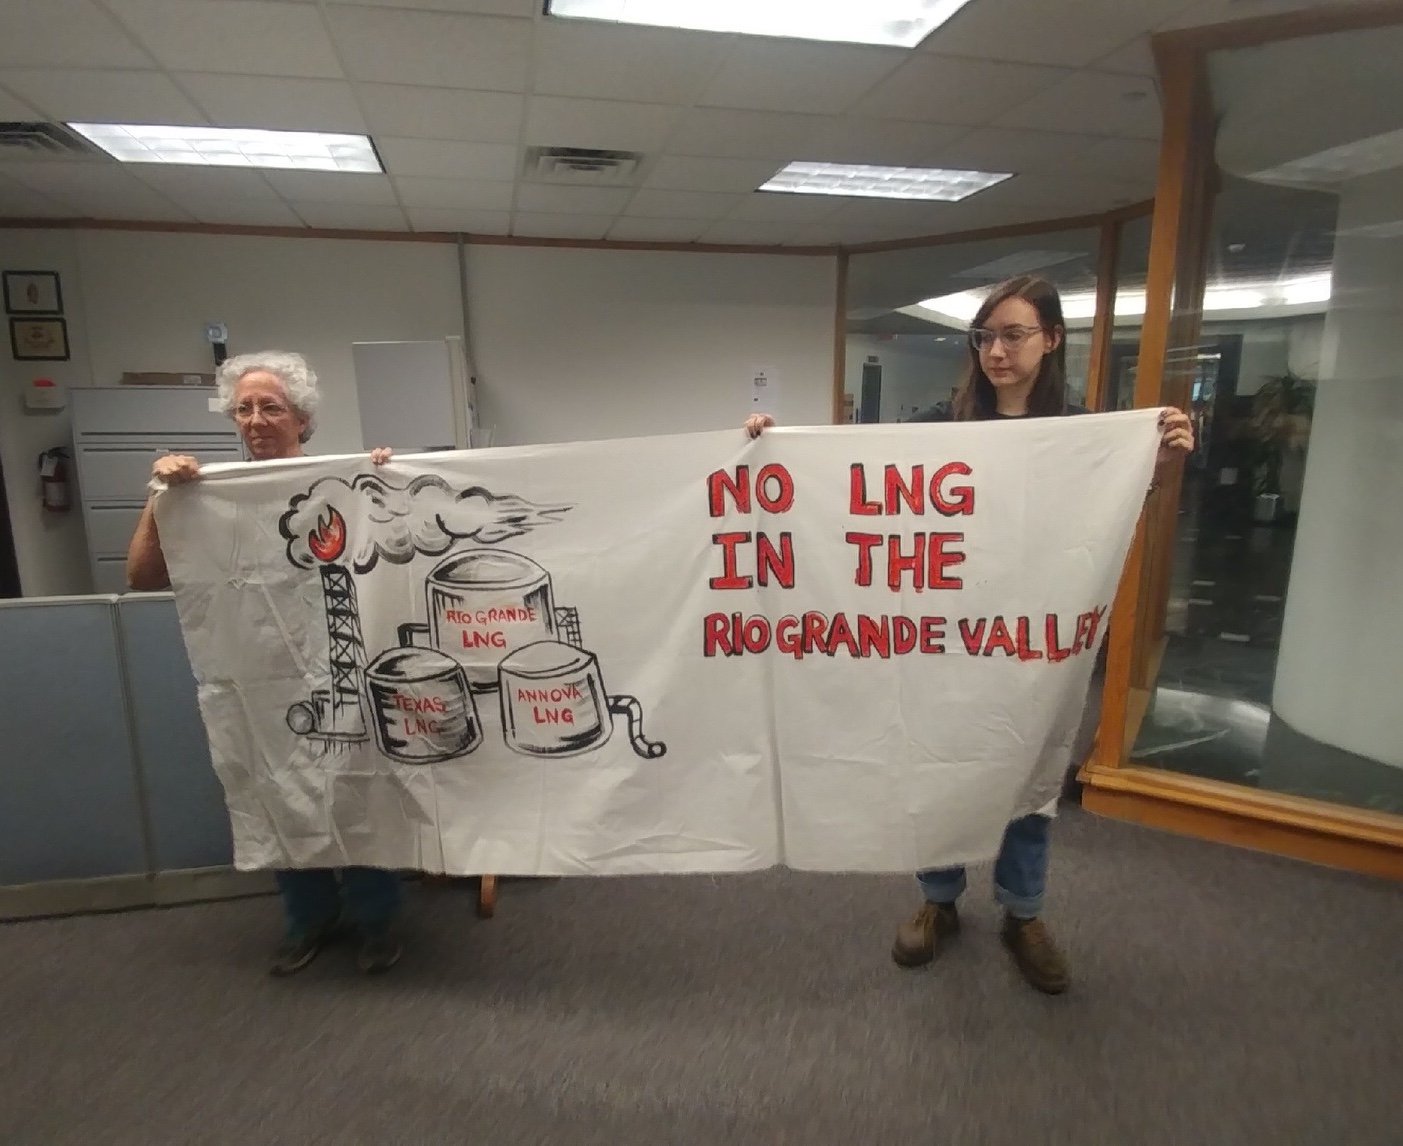 No LNG in RGV Banner at TCEQ HQ